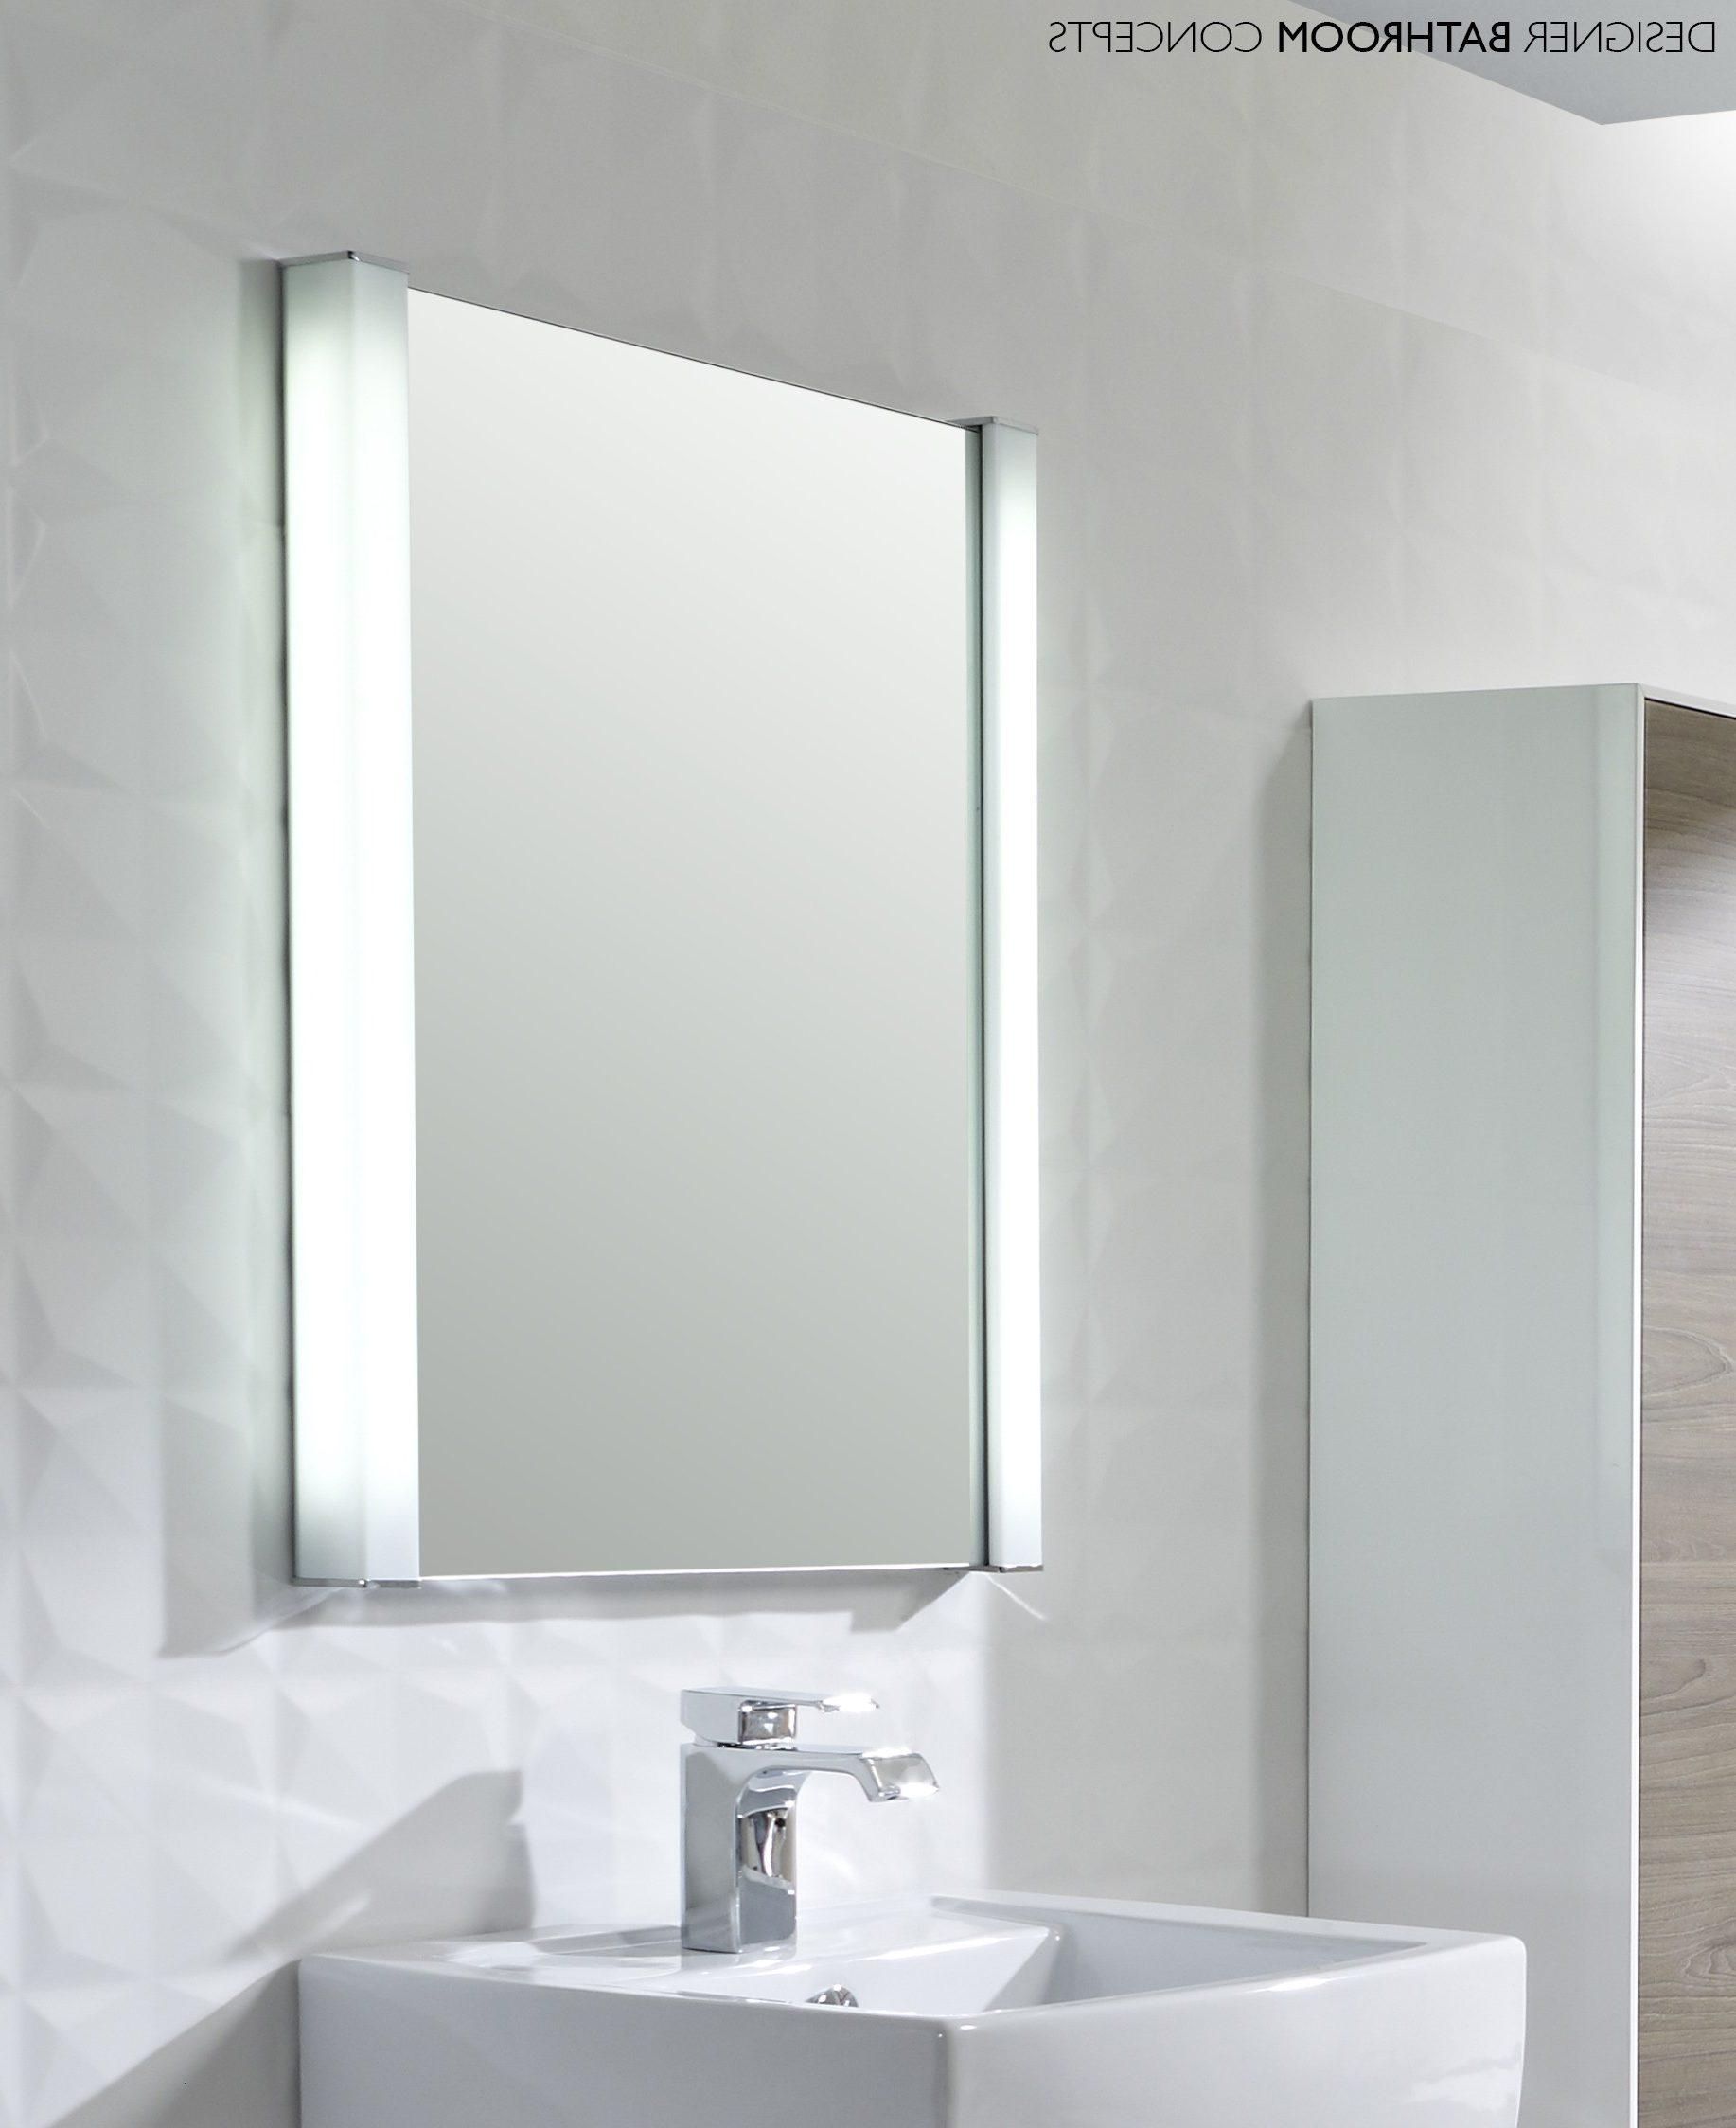 Illuminated Dressing Table Bathroom Mirrors Wall Mounted White For Free Standing Bathroom Mirrors (View 8 of 20)